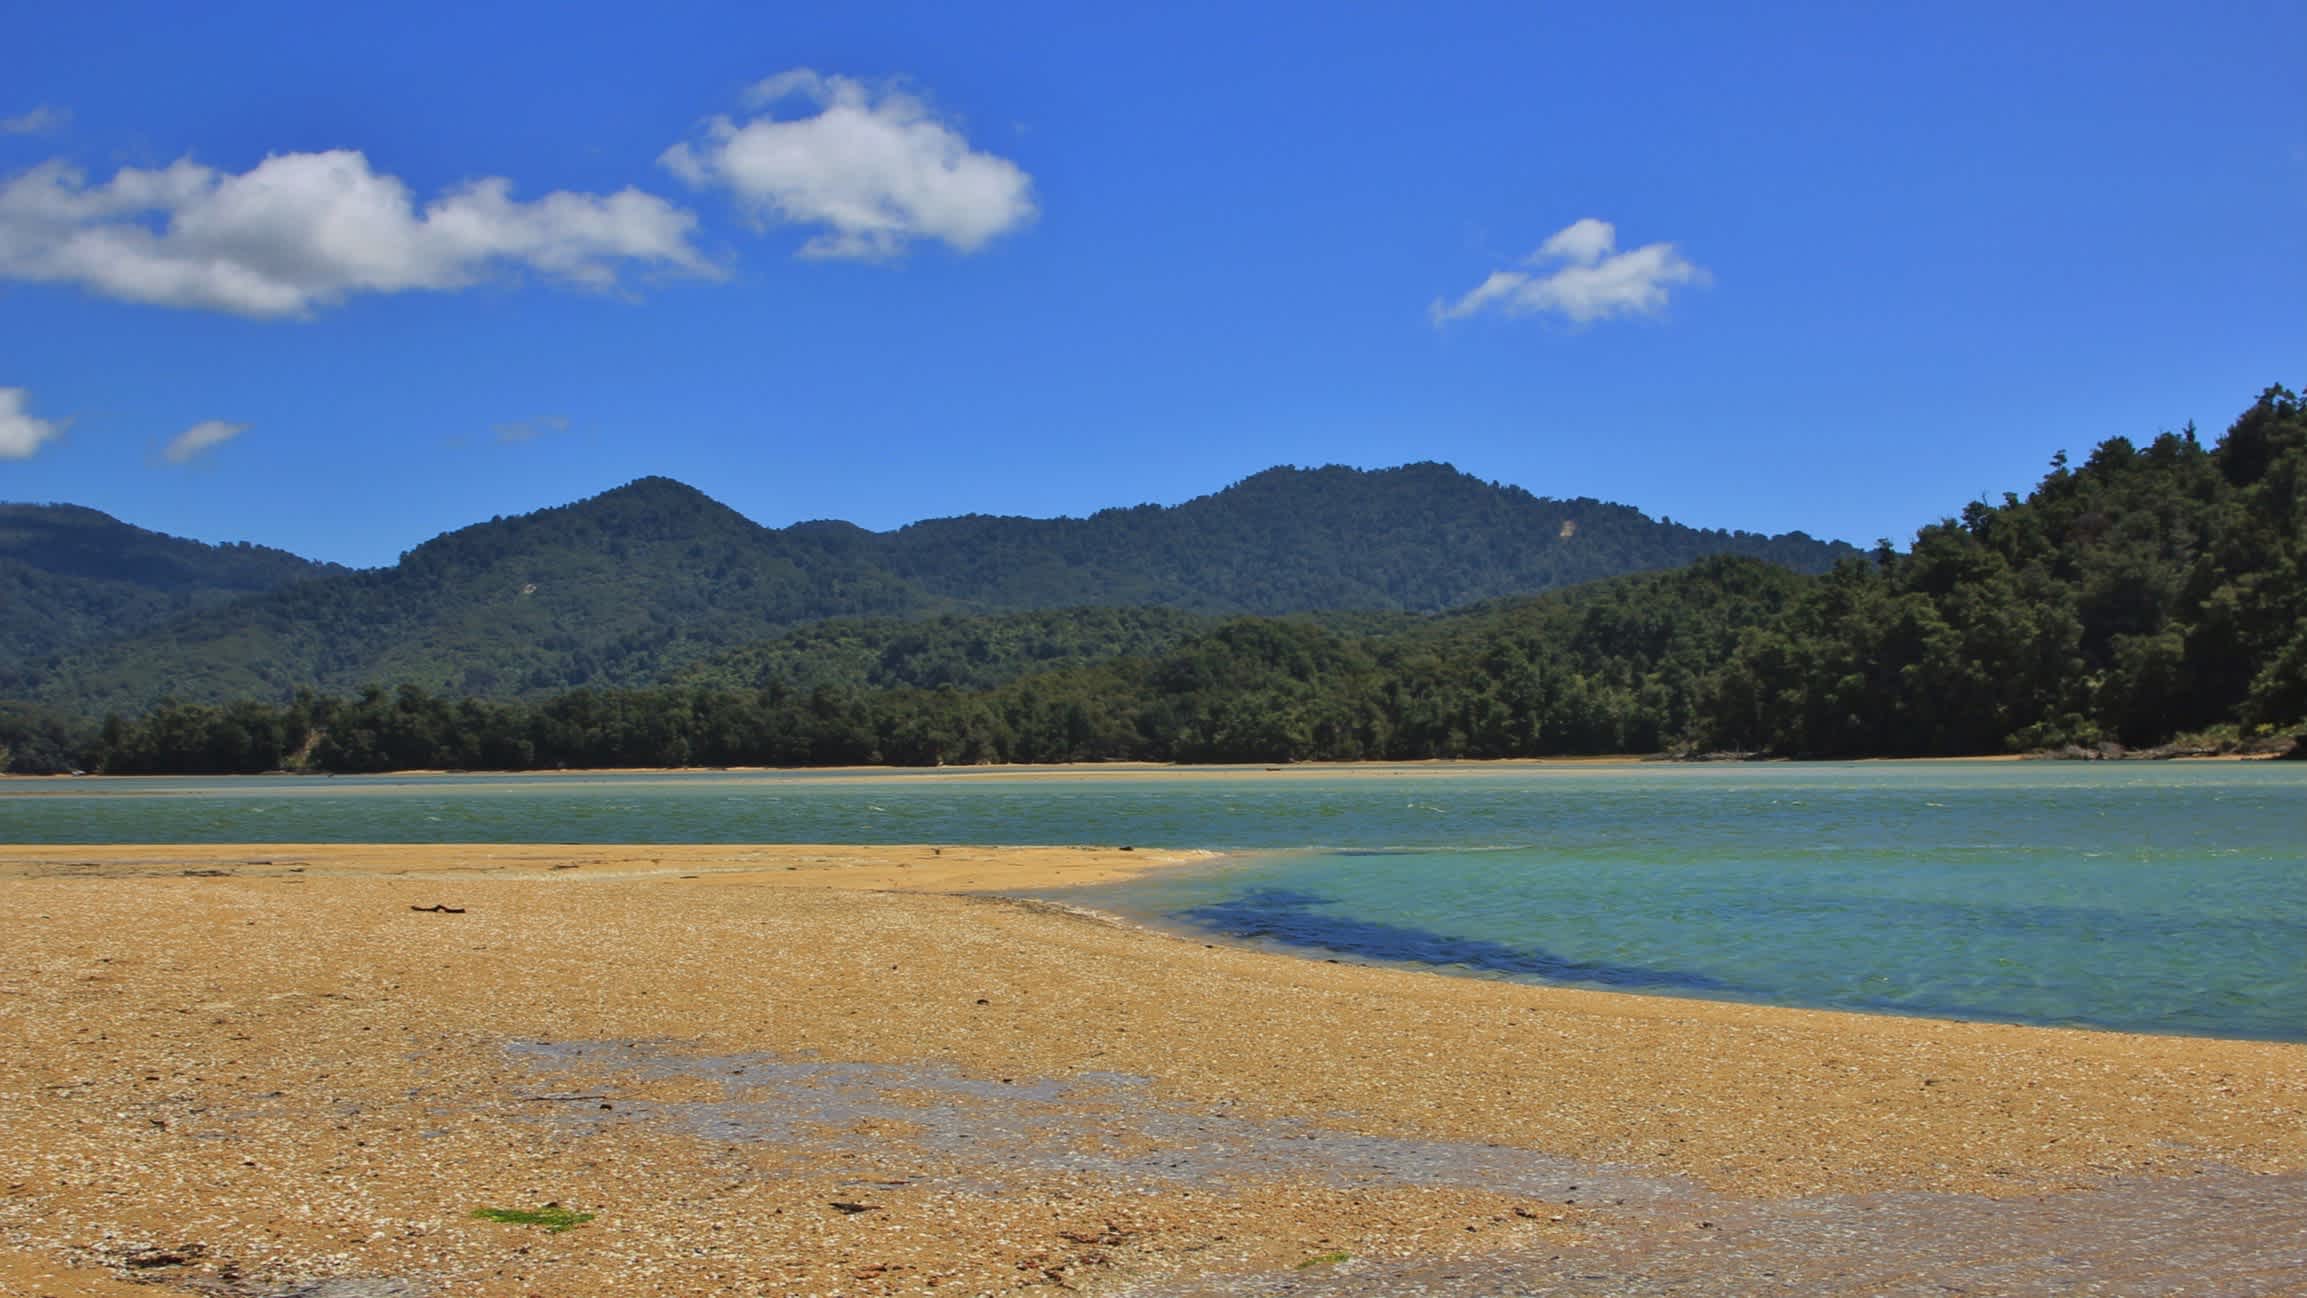 Golden sand at the edge of the blue water of Awaroa Inlet Bay in Abel Tasman National Park, New Zealand with green cliffs in the background.